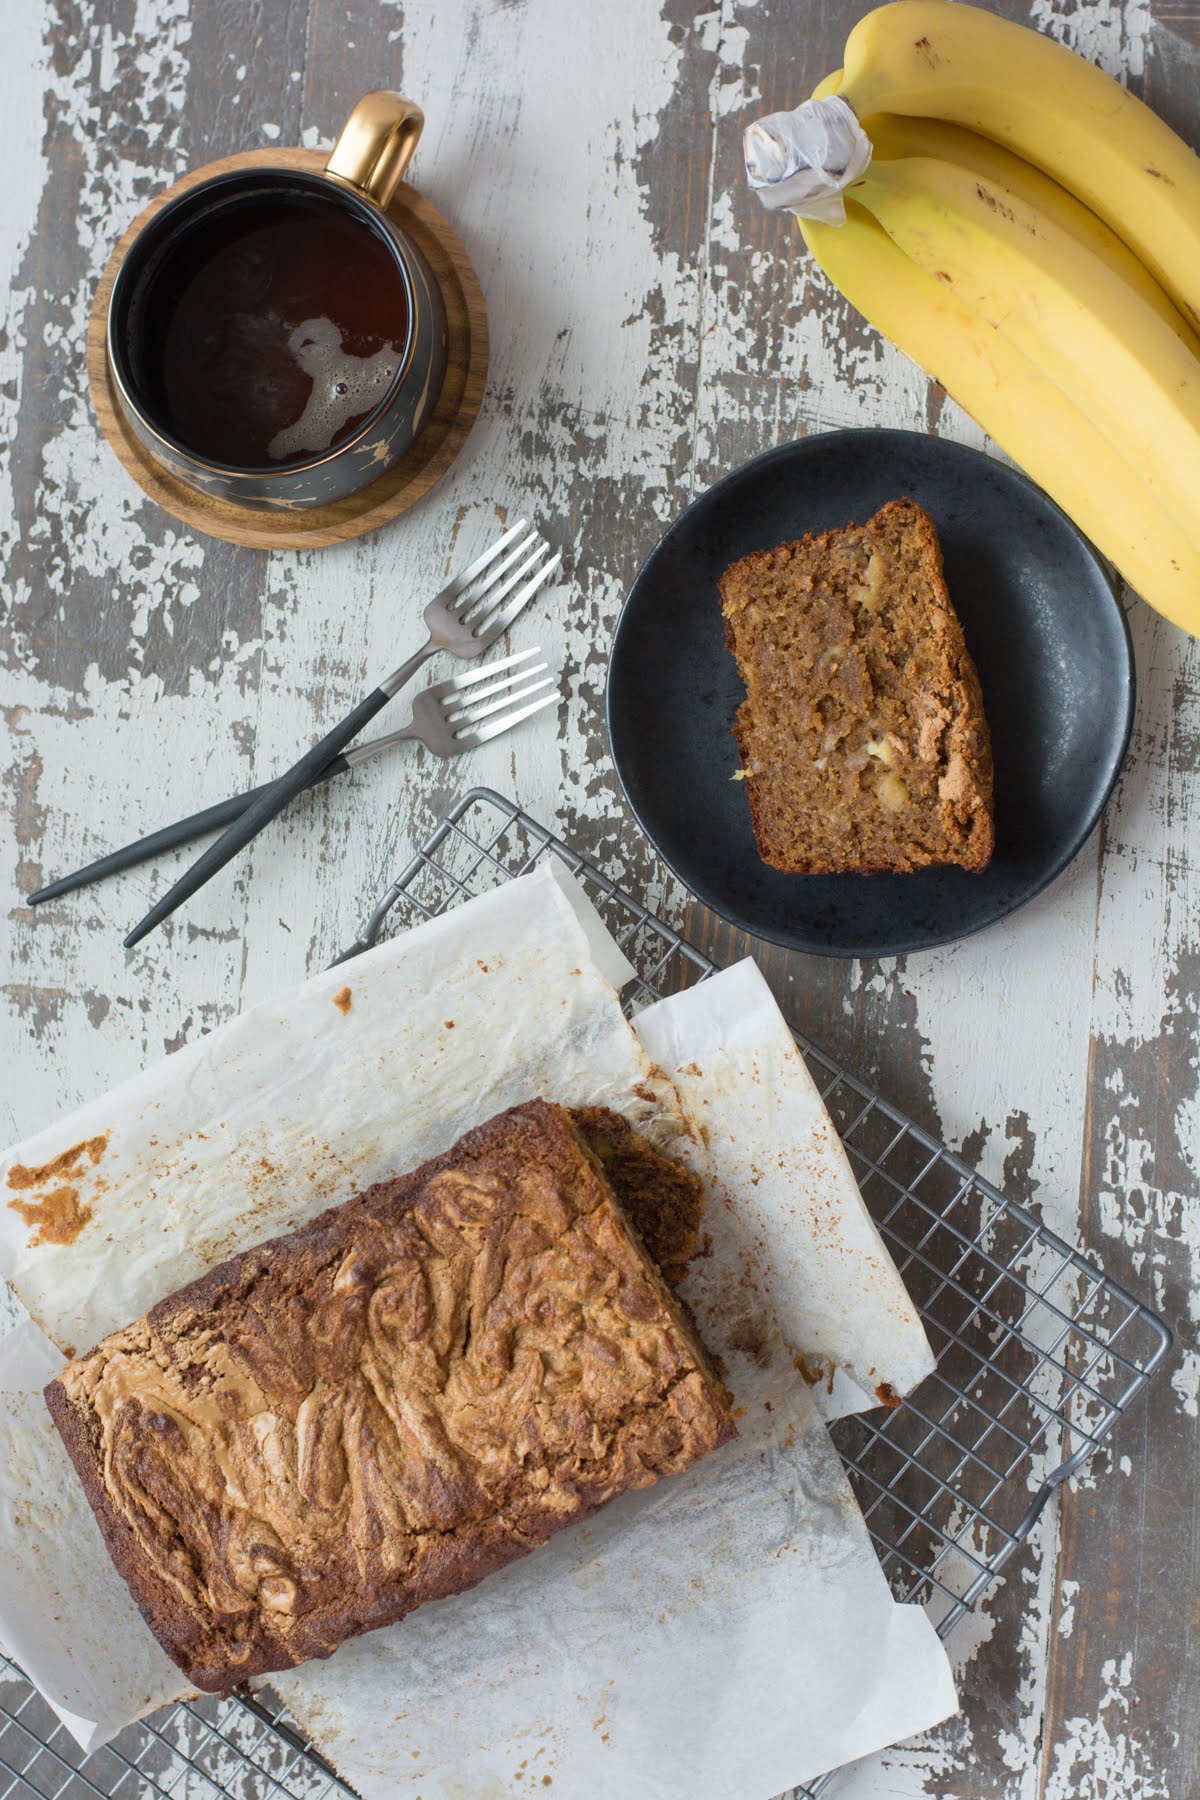 A loaf of banana bread beside a mug of coffee and a single slice of bread on a plate